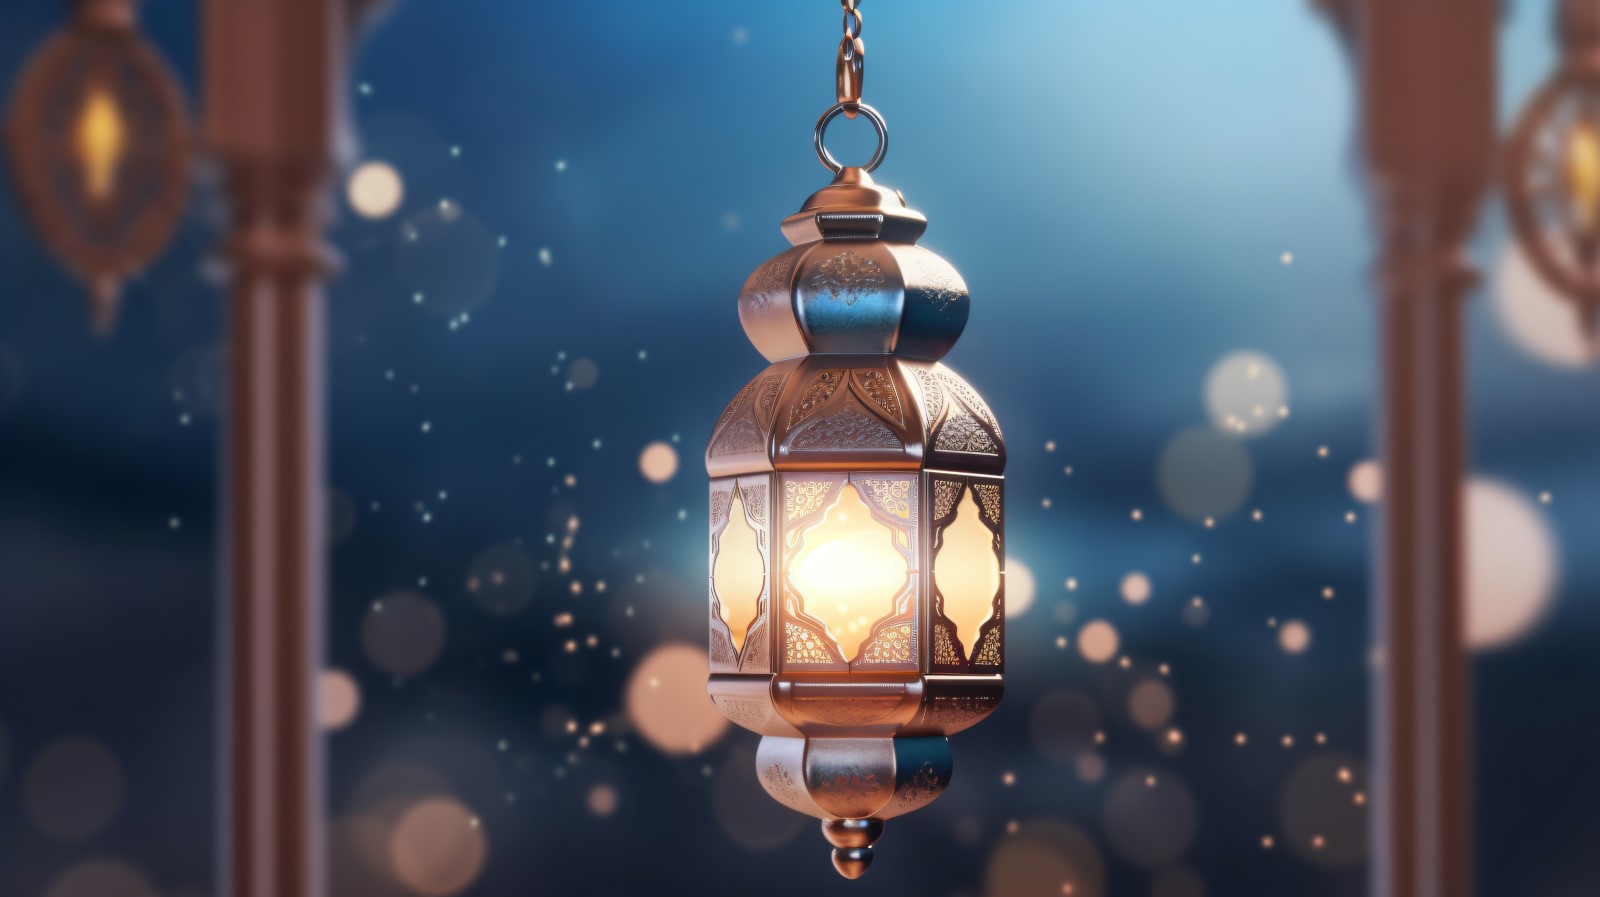 Islamic background with a hang lantern 15